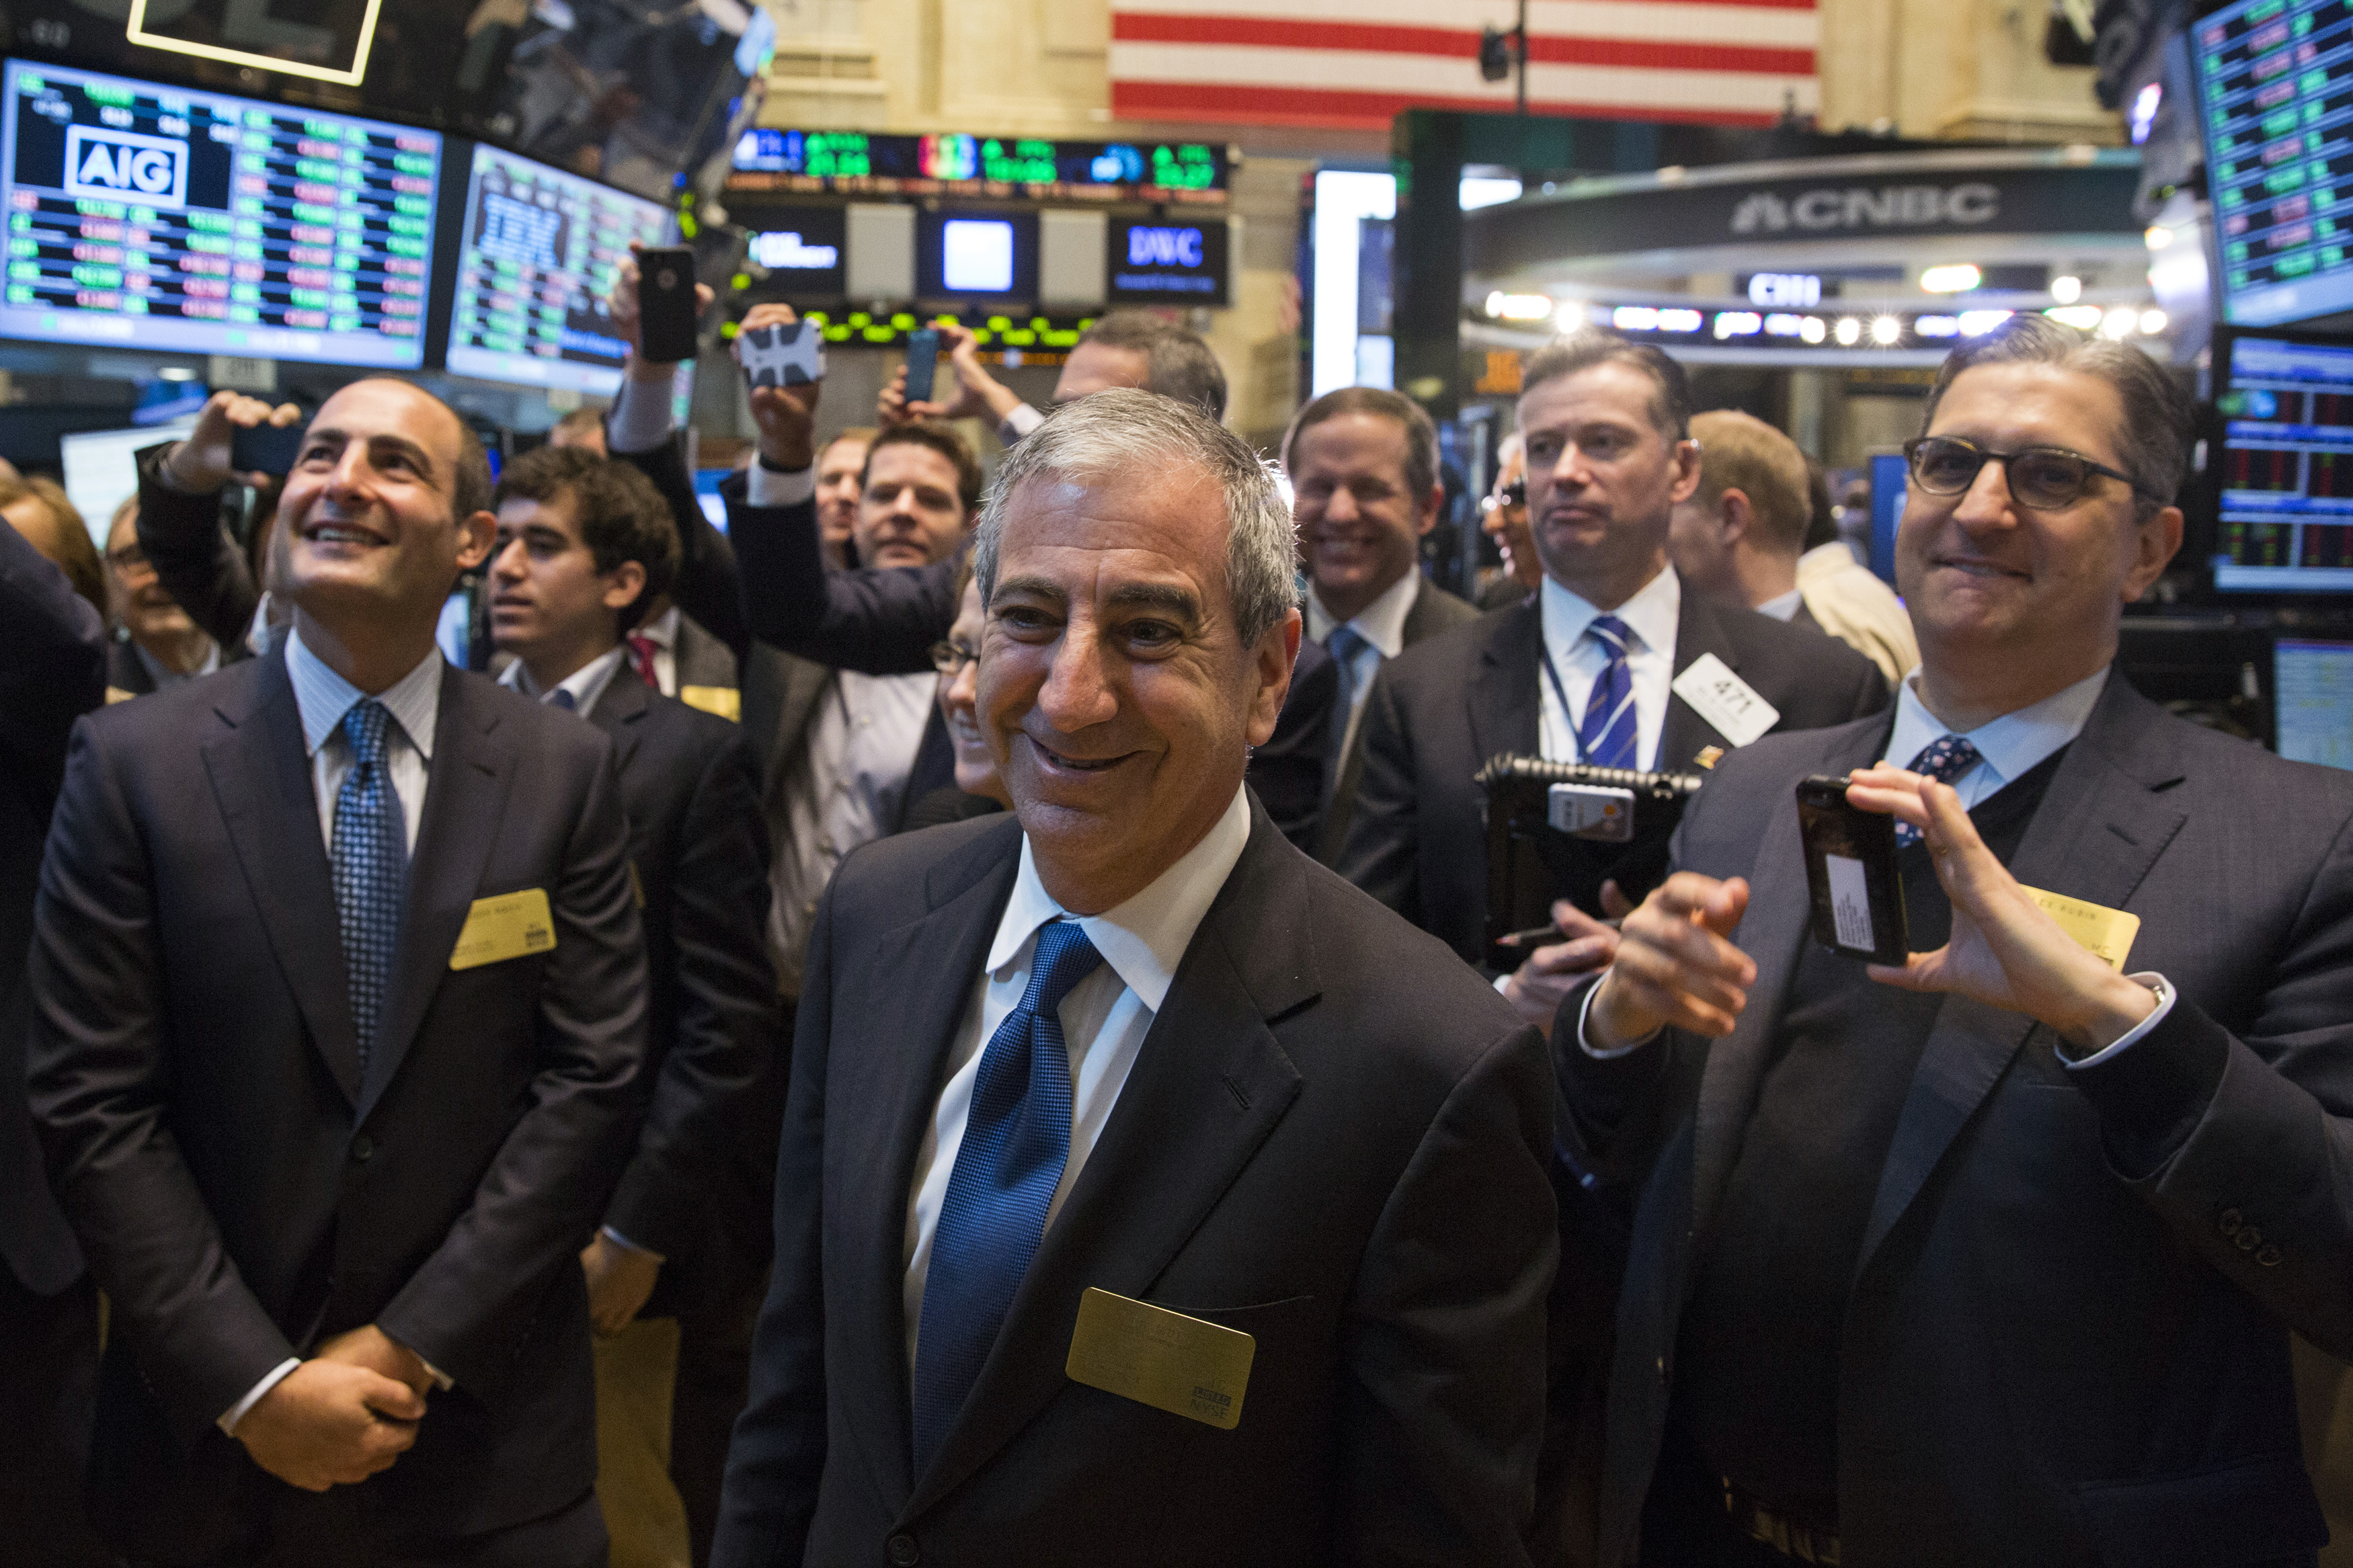 Chief executive officer of Moelis & Co., Ken Moelis smiles after ringing the bell to mark the company's IPO on the floor of the New York Stock Exchange shortly after the opening bell in New York